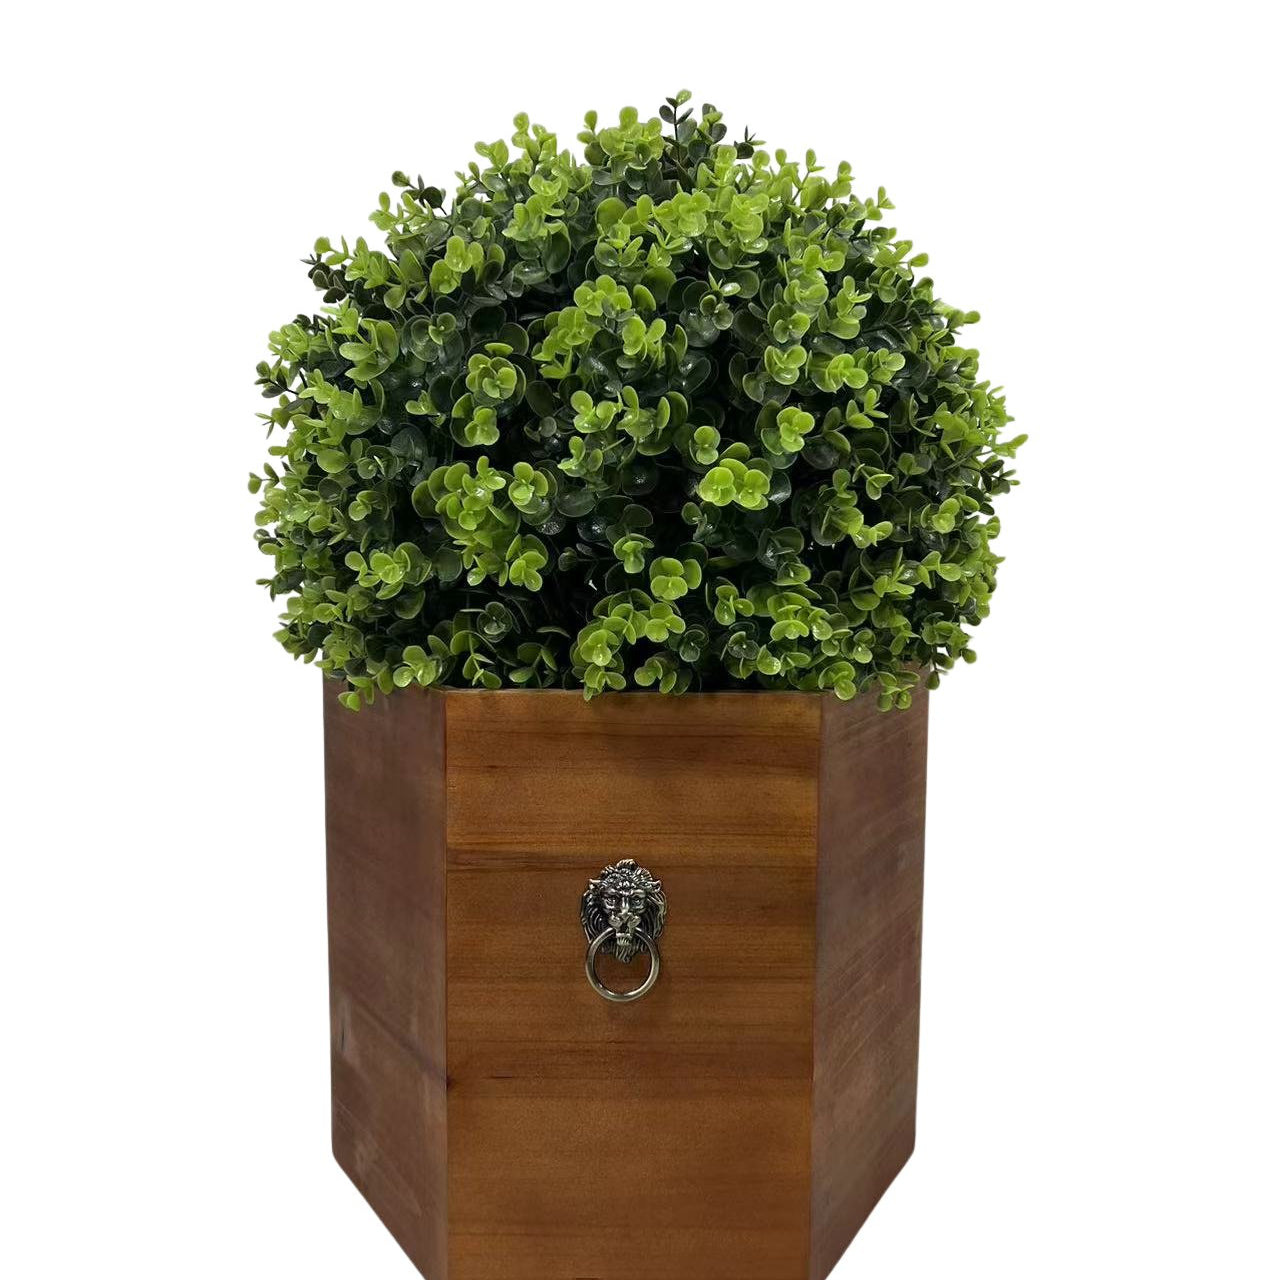 24" Ball Topiary Faux Plant in Redwood Pot - Outdoor